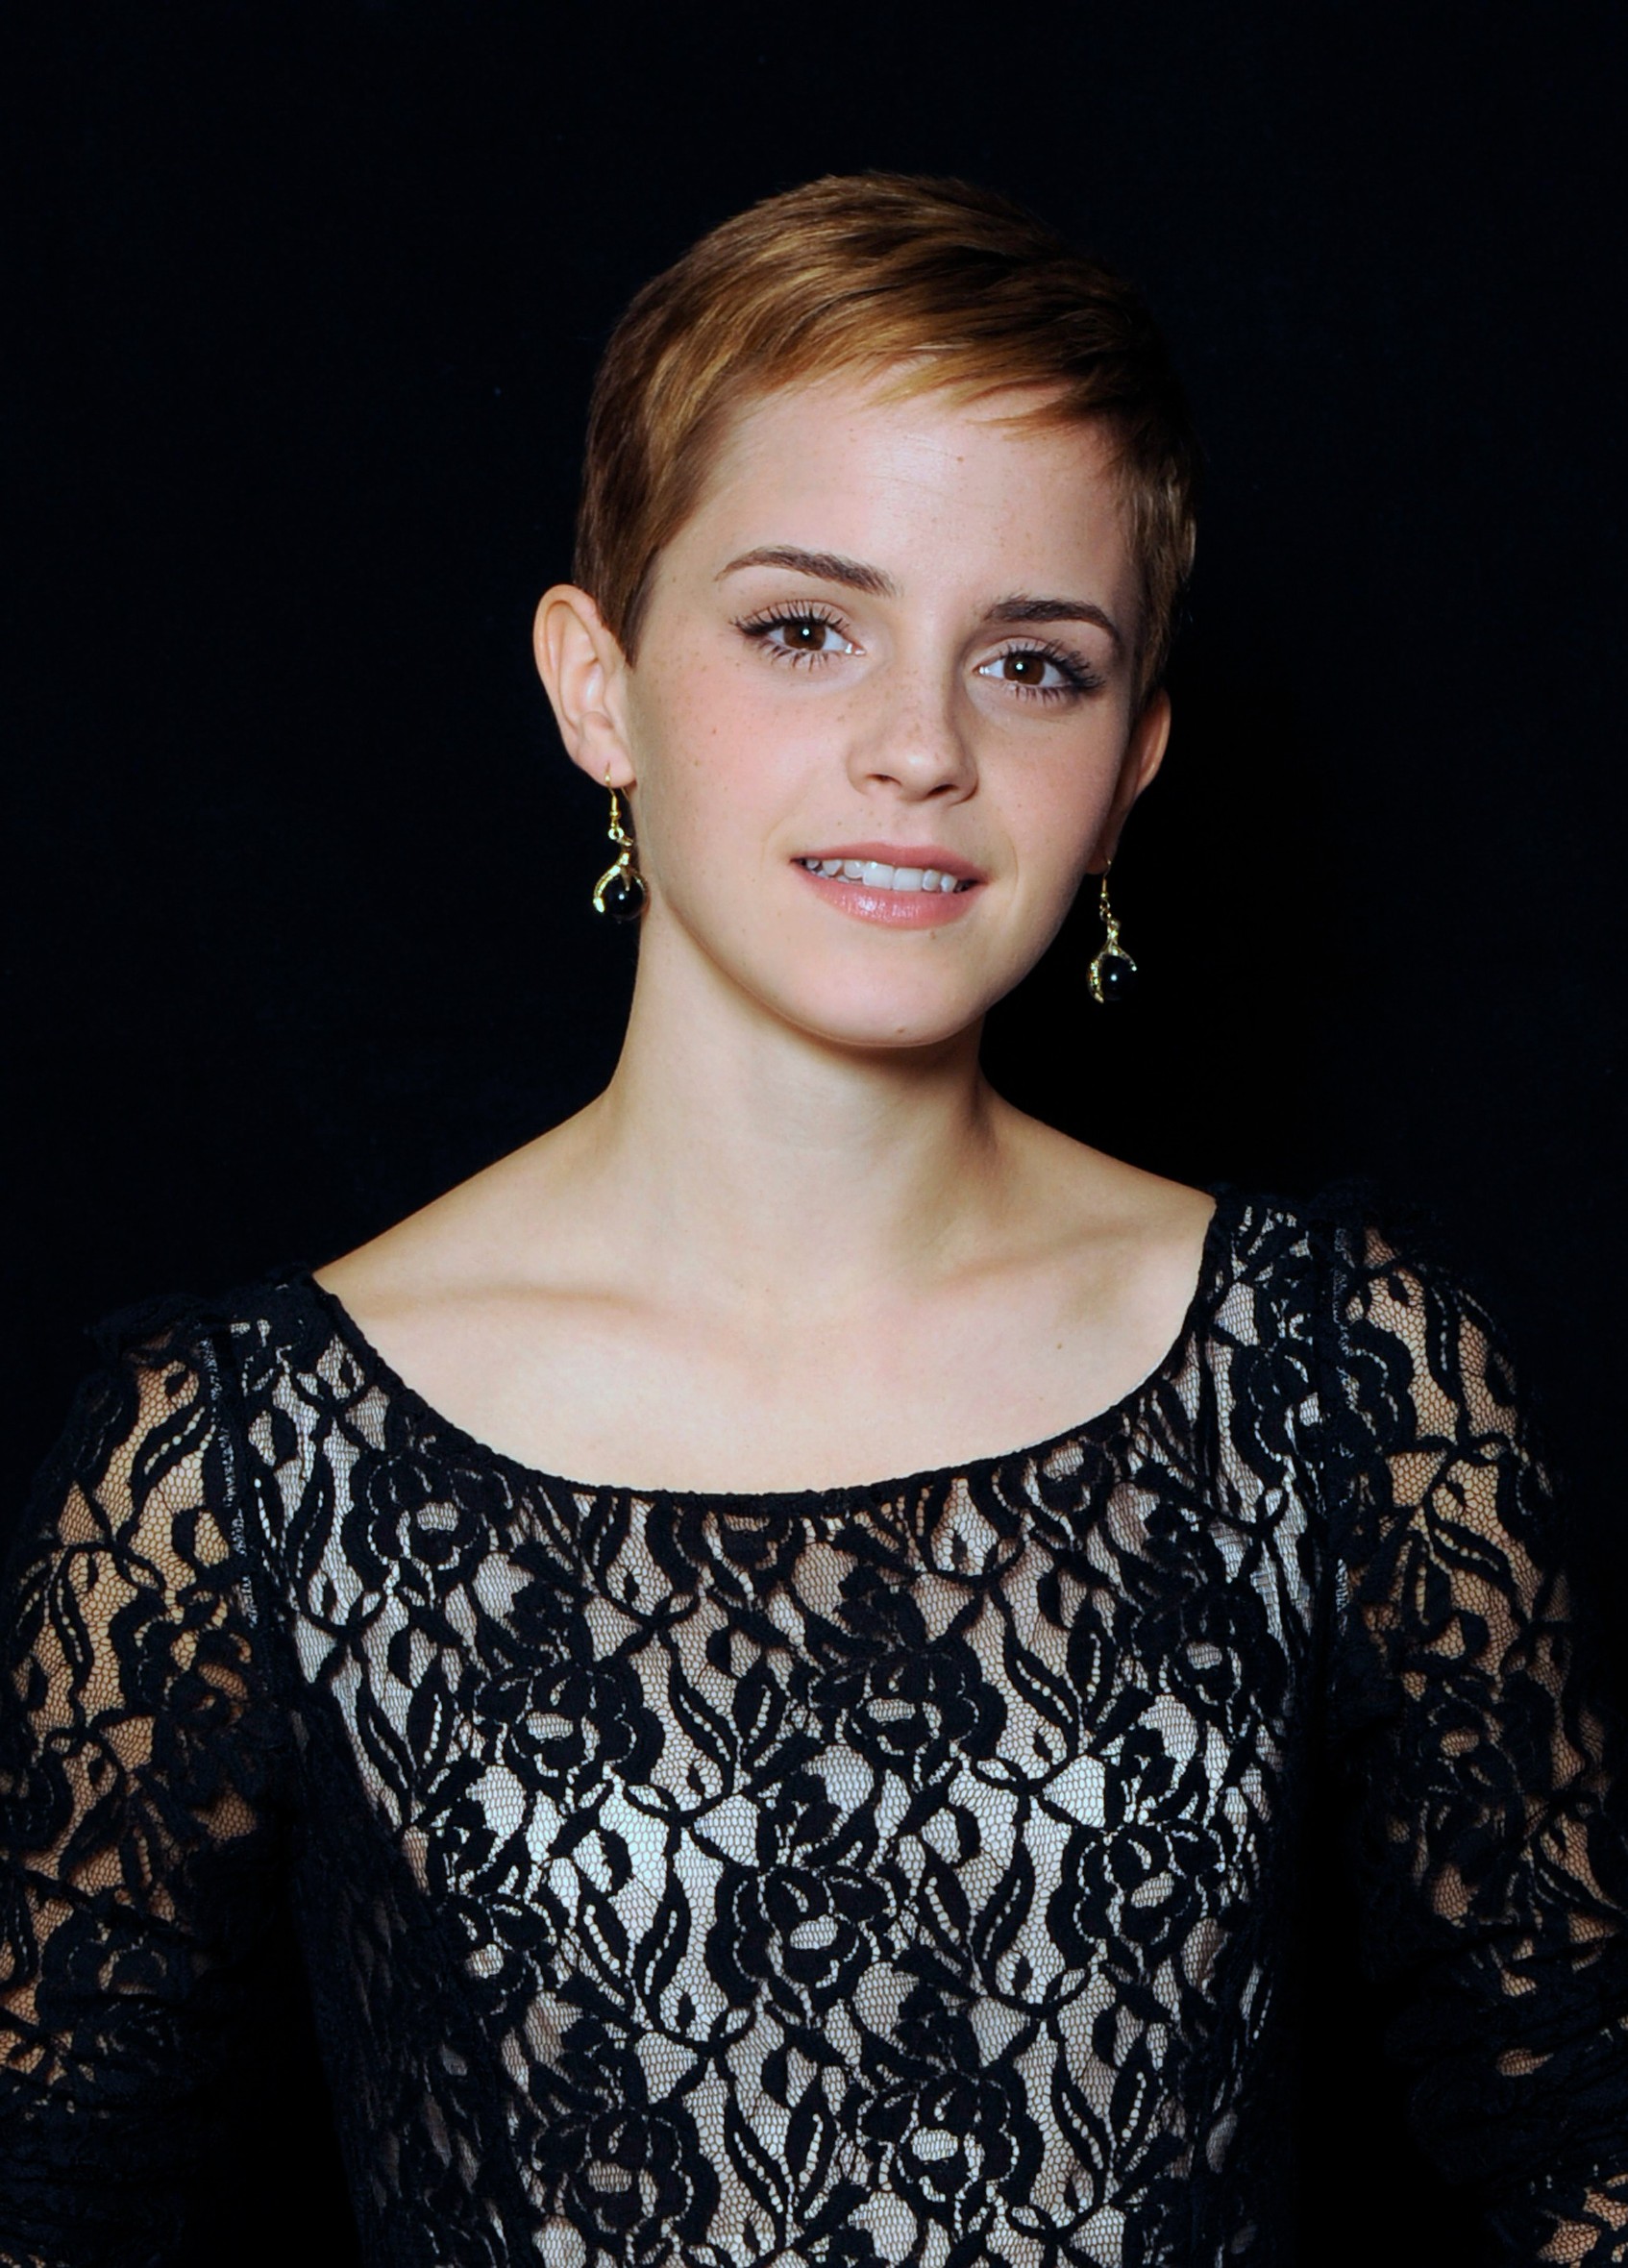 EMMA WATSON
At a shoot promoting the latest and final Harry Potter movie, 'Harry Potter and the Deathly Hallows' at Berkeley Hotel, London, England, UK
August 10th, 2010
half length black lace short cropped hair headshot portrait, Image: 82353614, License: Rights-managed, Restrictions: , Model Release: no, Credit line: Steve Finn / Capital pictures / Profimedia